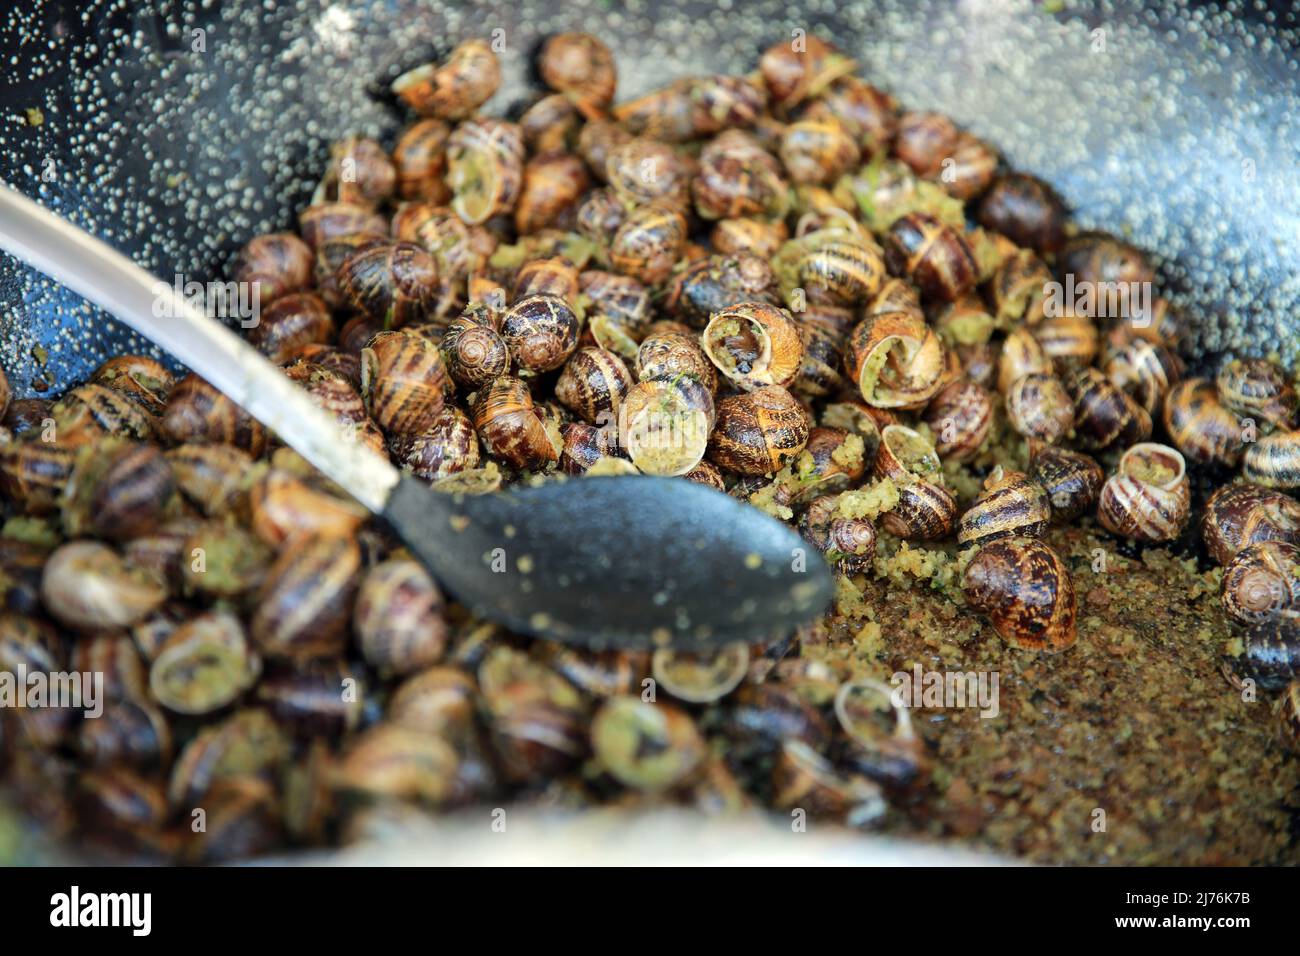 Snails being cooked in garlic butter at a French Market. Stock Photo